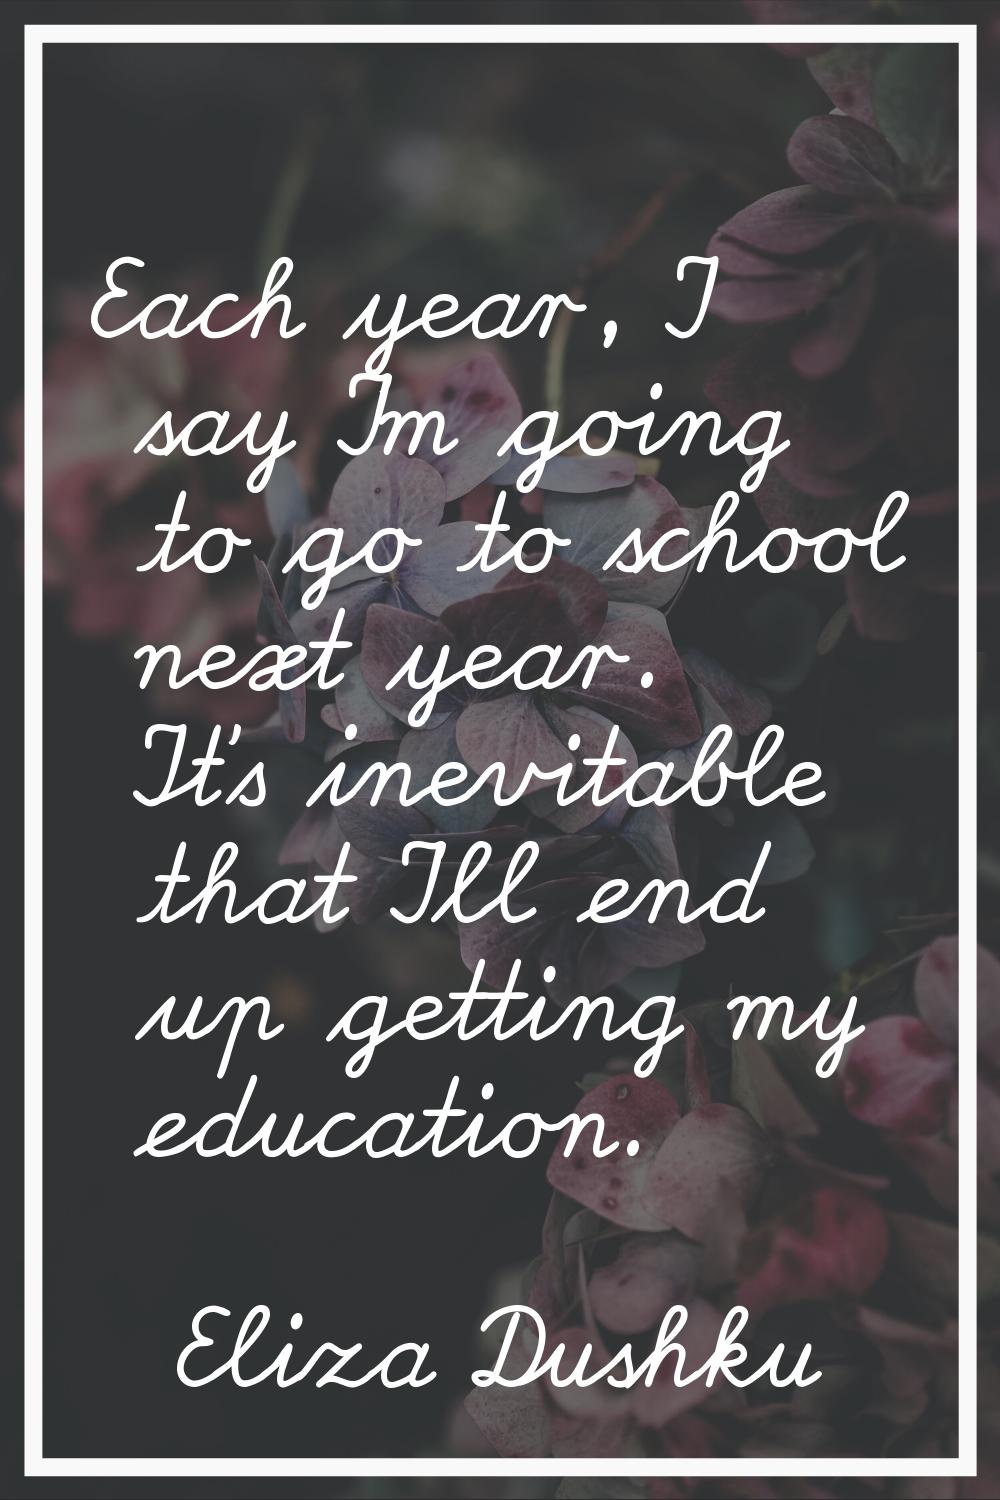 Each year, I say I'm going to go to school next year. It's inevitable that I'll end up getting my e